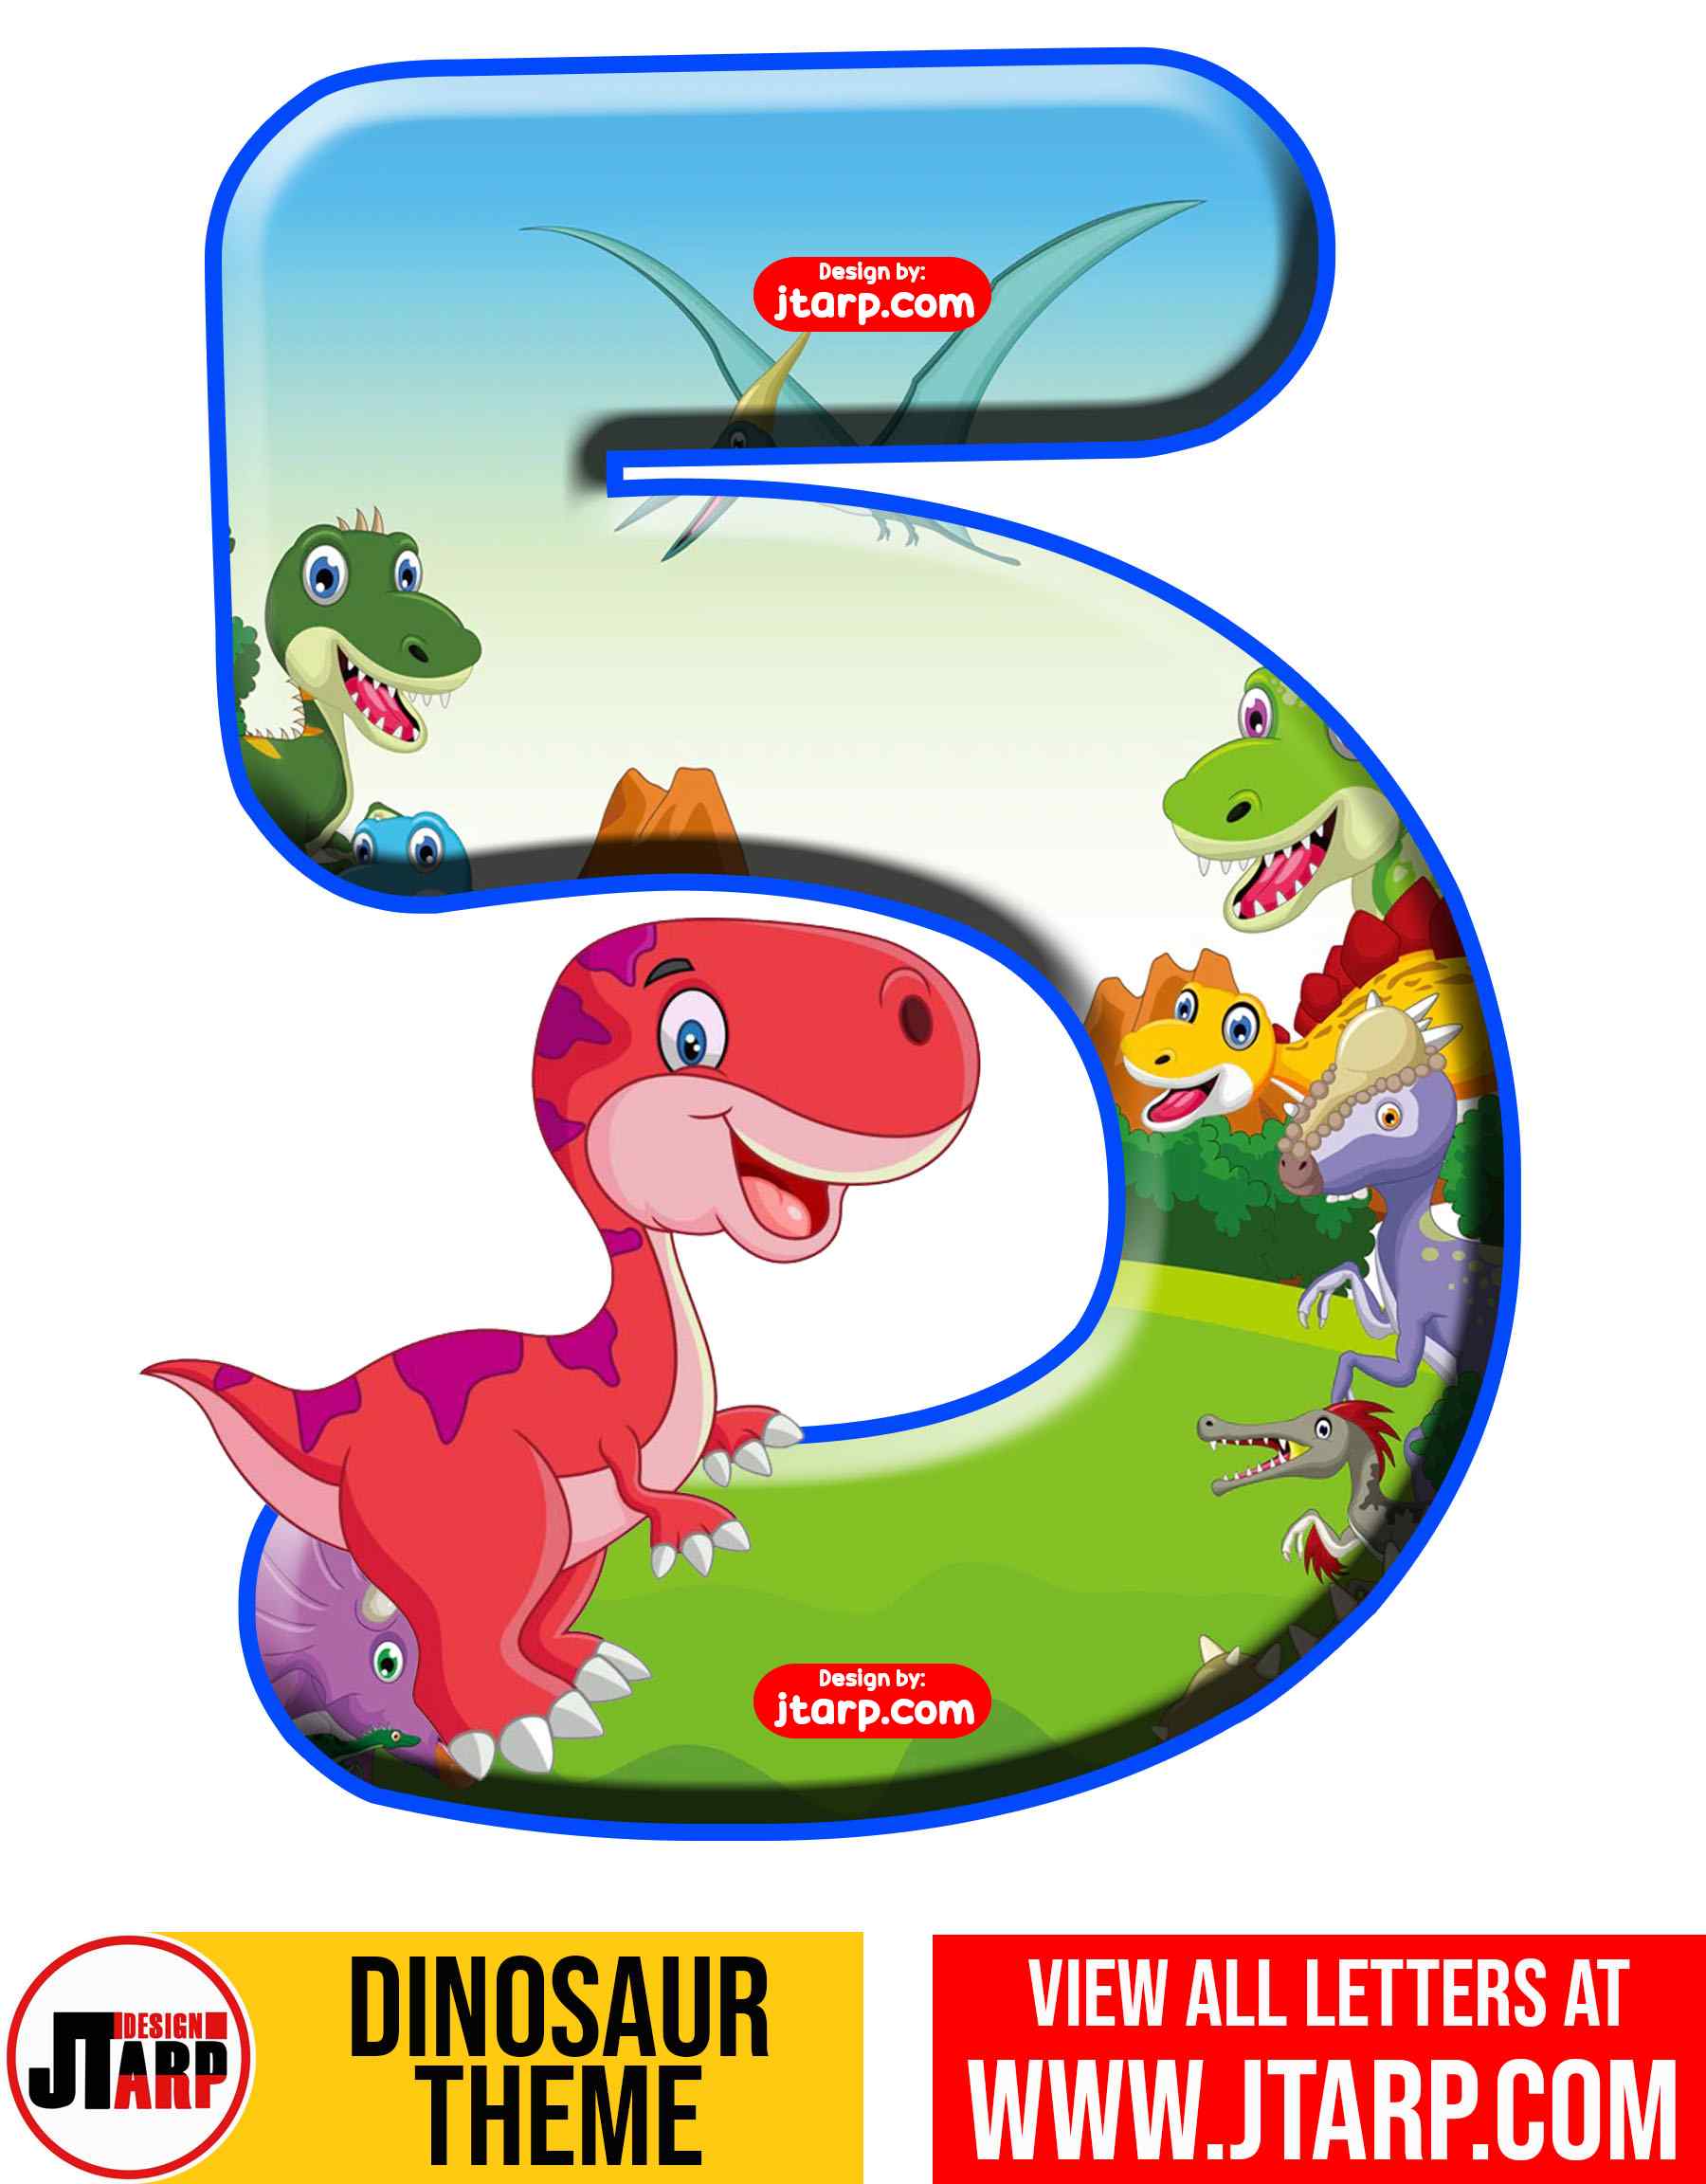 Dinosaurs Printable Letters A-Z and Numbers 0-9 - Album JTarp Design